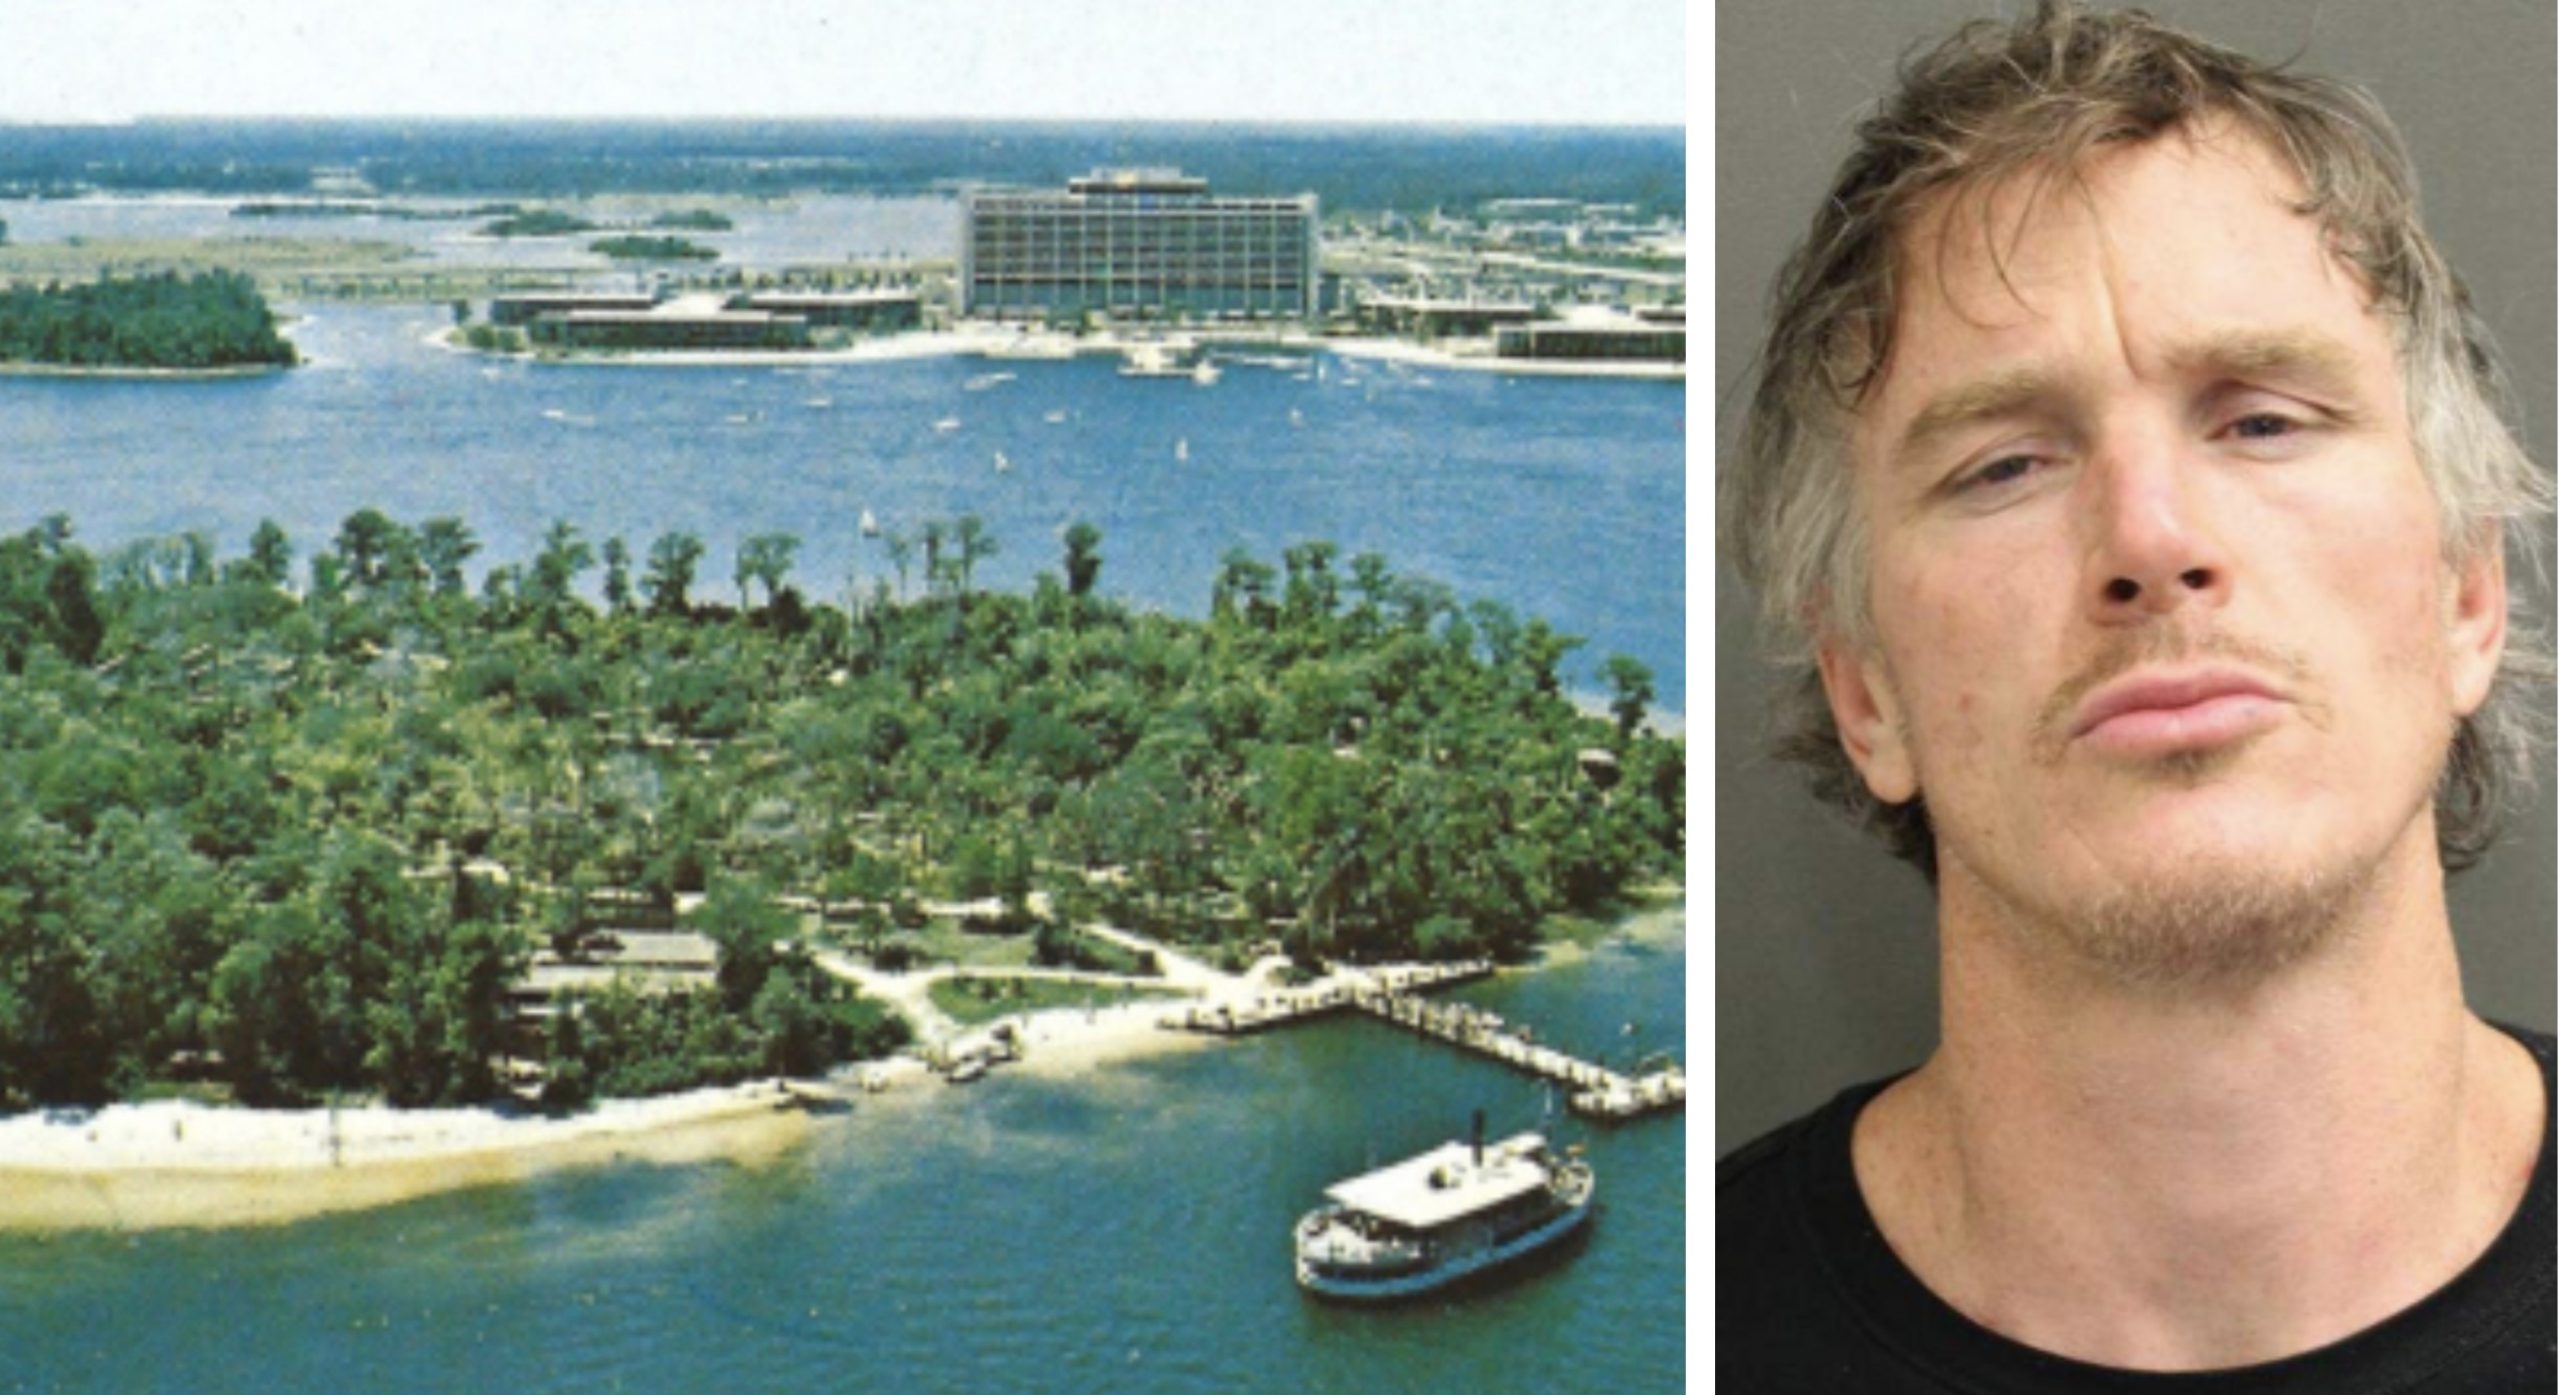 Florida Man arrested for camping on Disney’s Discovery Island